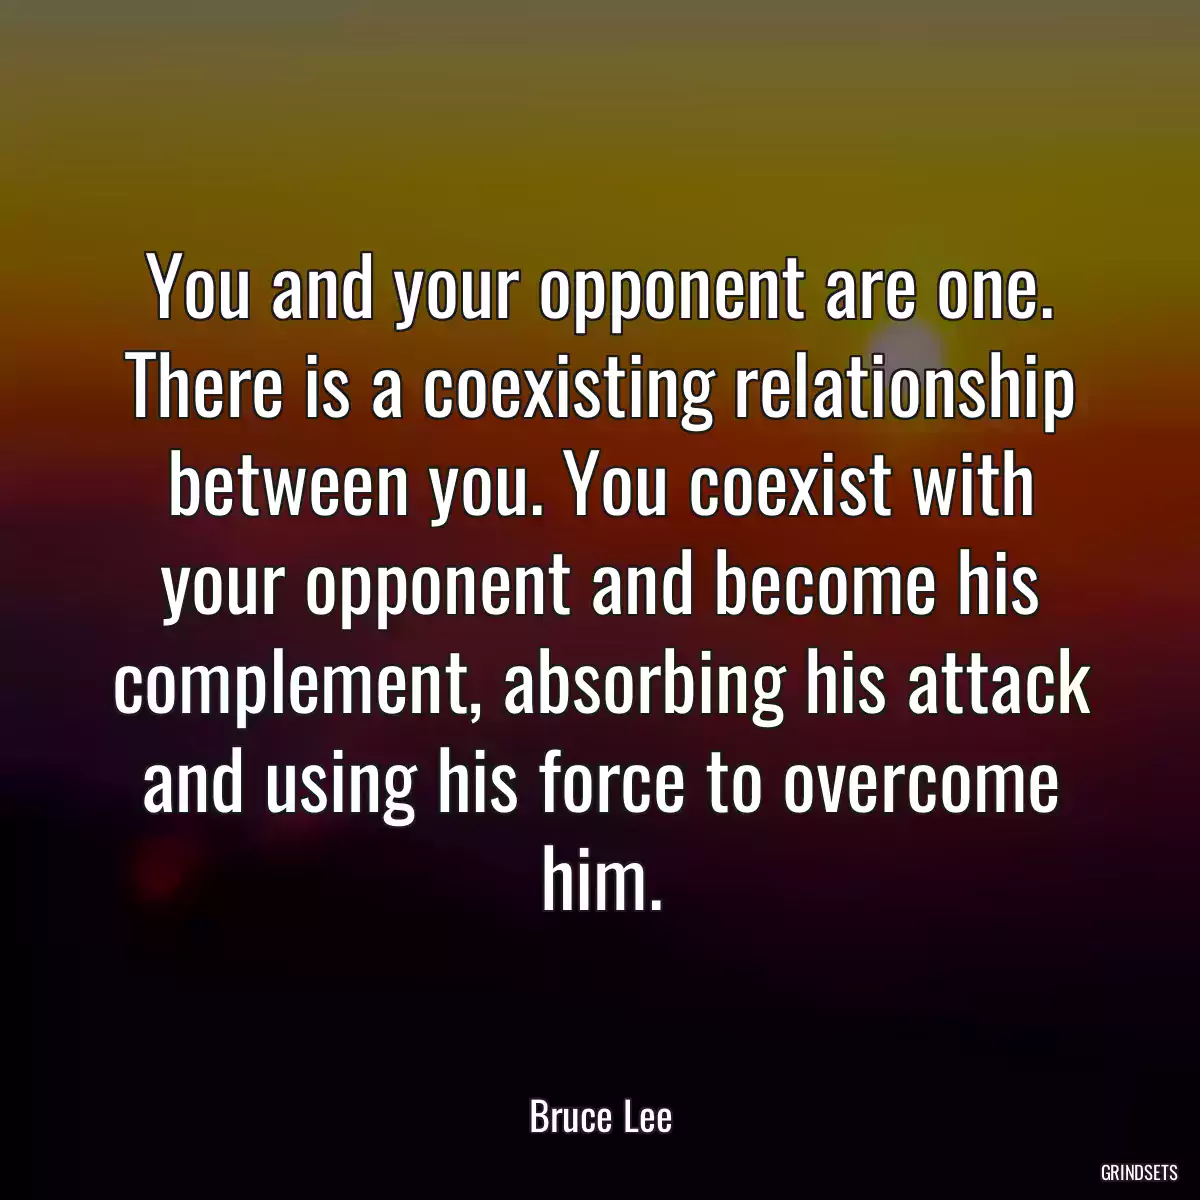 You and your opponent are one. There is a coexisting relationship between you. You coexist with your opponent and become his complement, absorbing his attack and using his force to overcome him.